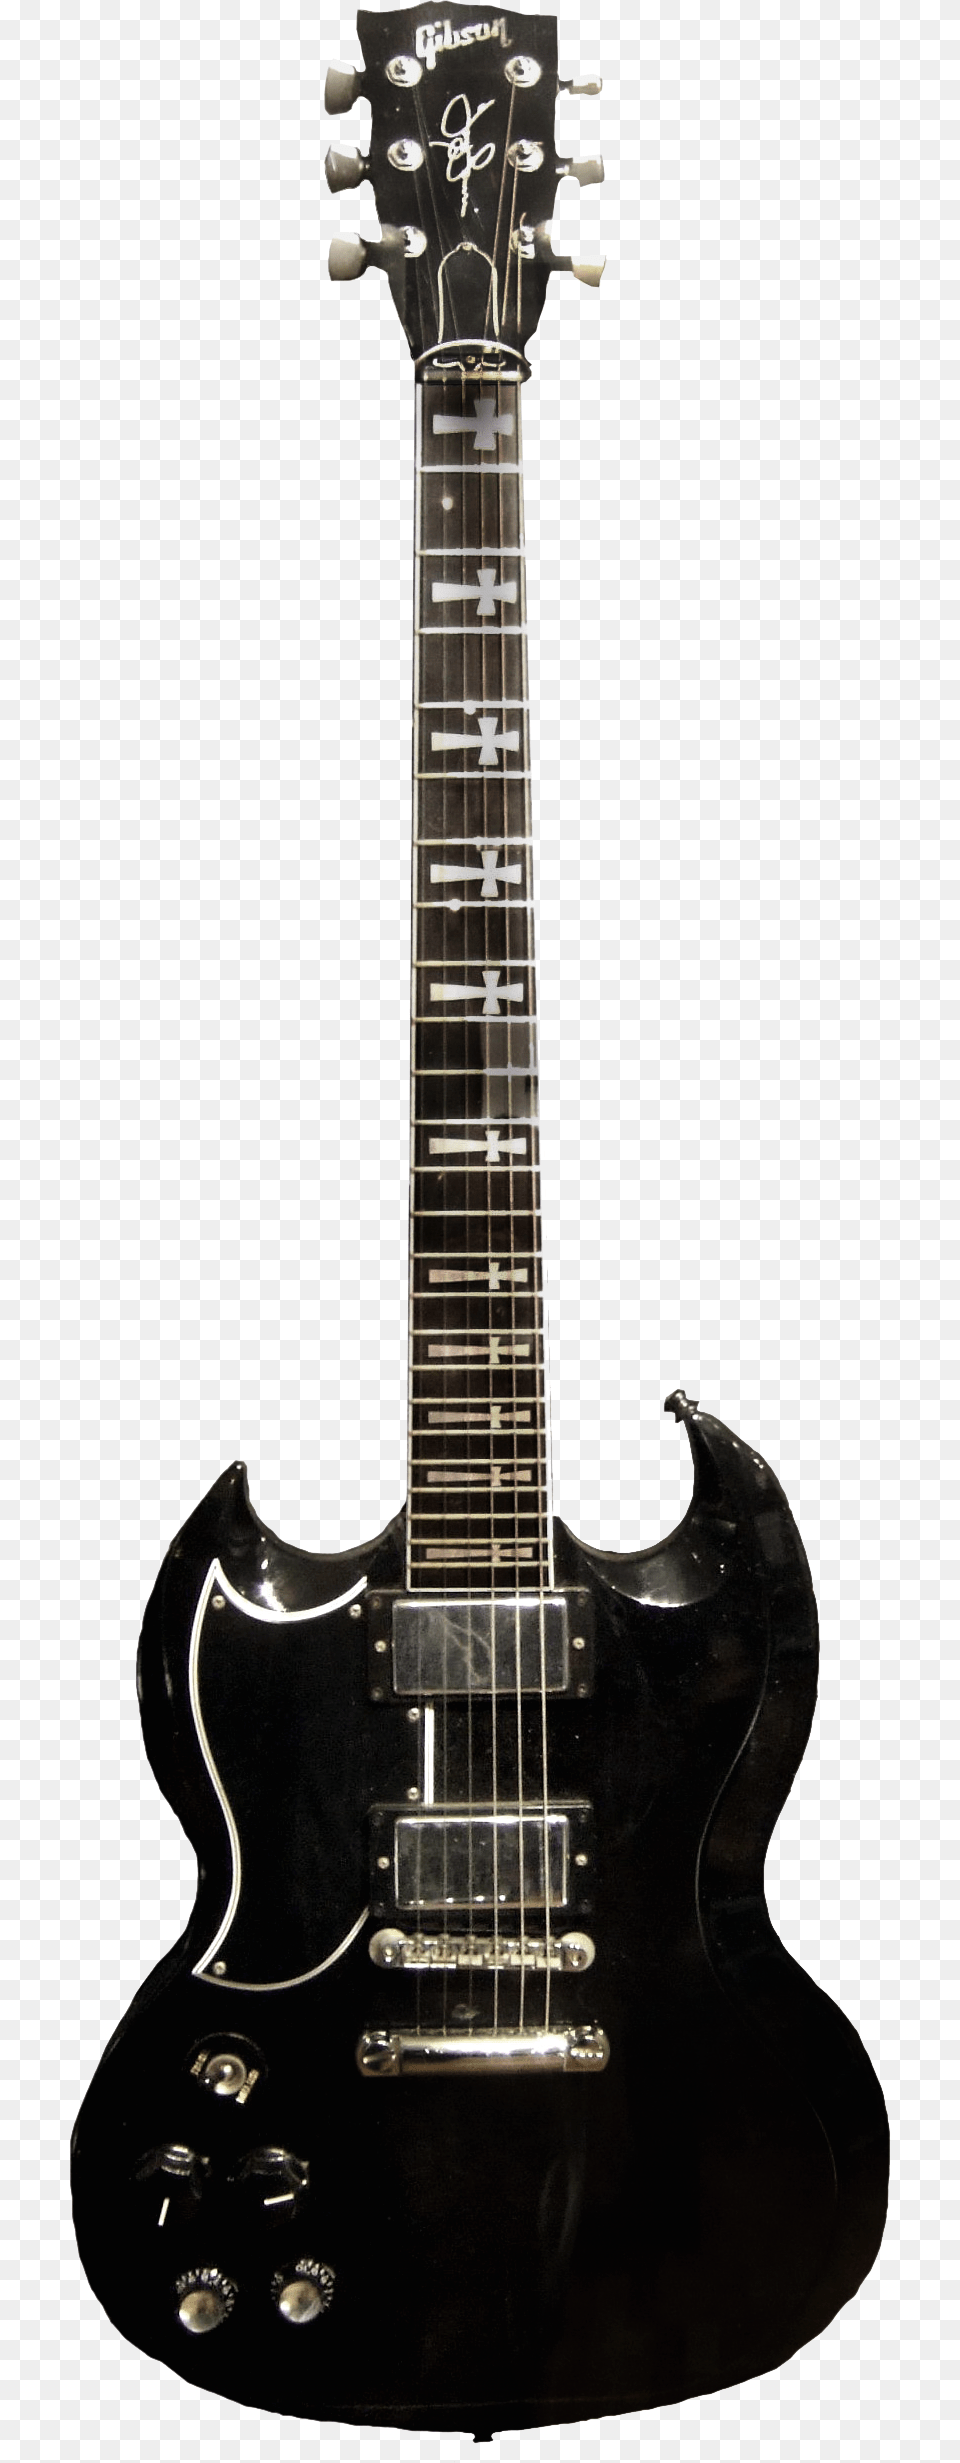 Iommi Sg Guitar Epiphone Sg Special, Electric Guitar, Musical Instrument, Bass Guitar Png Image